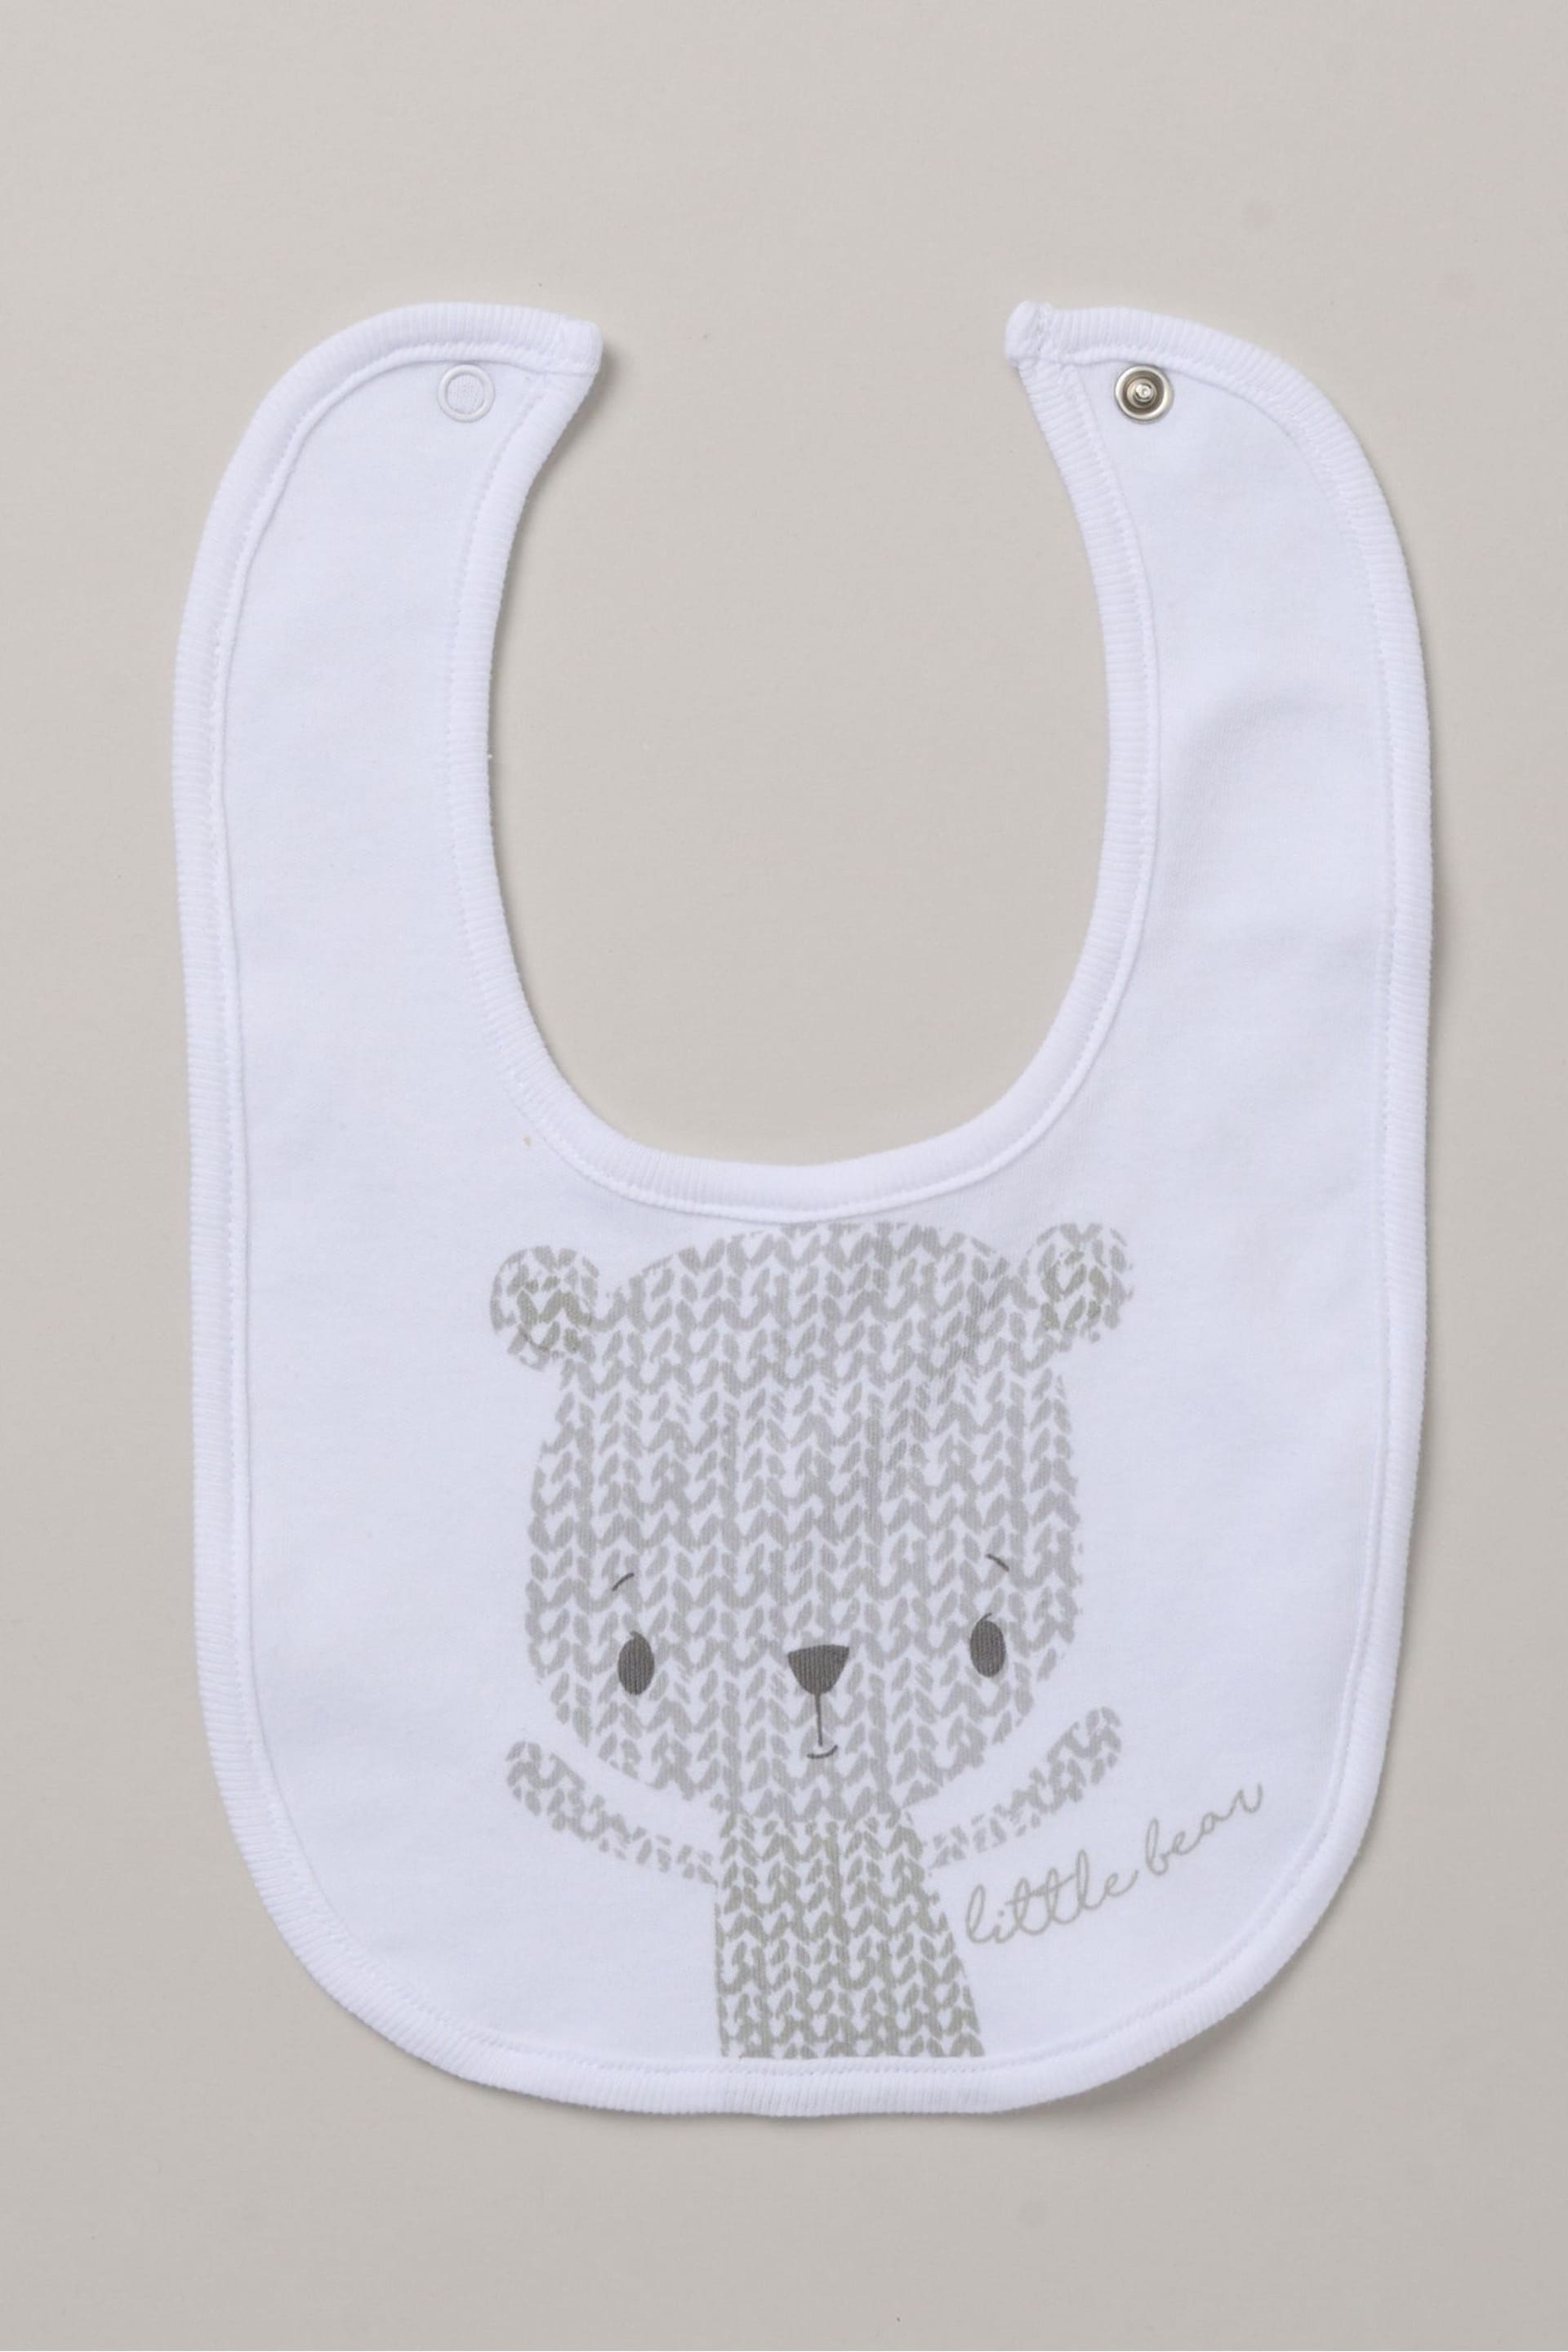 Rock-A-Bye Baby Boutique Bear Print Cotton 5-Piece Baby White Gift Set - Image 5 of 6